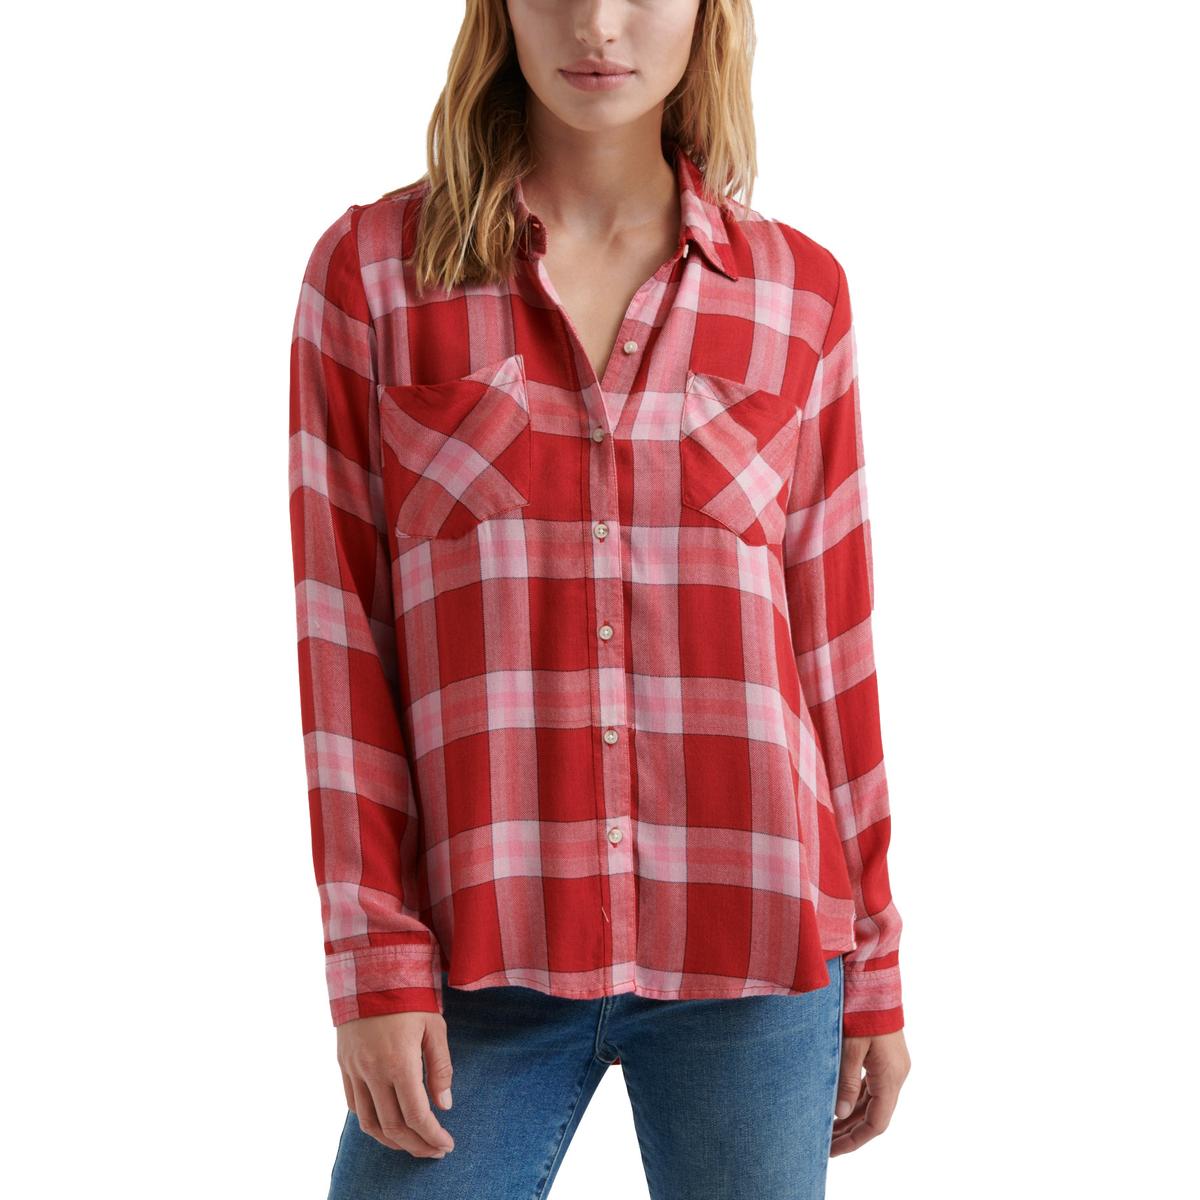 Lucky Brand Womens Red Plaid Collared Casual Button-Down Top Shirt M ...